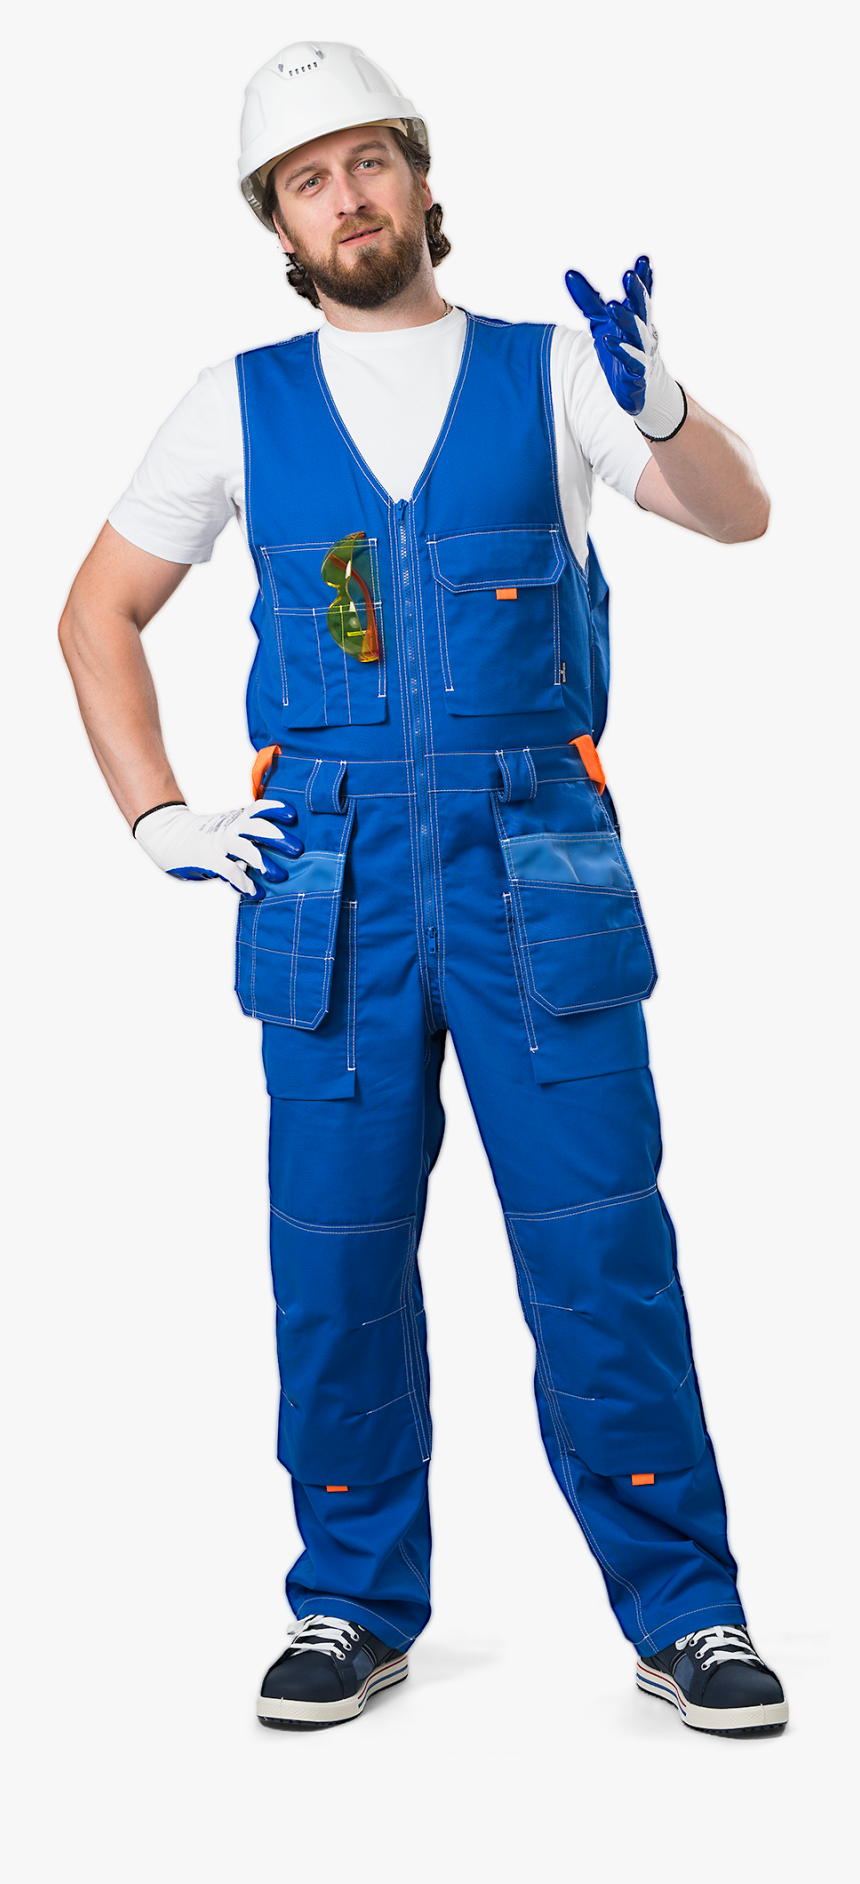 City-master Men"s Bib Overall - Costume, HD Png Download, Free Download